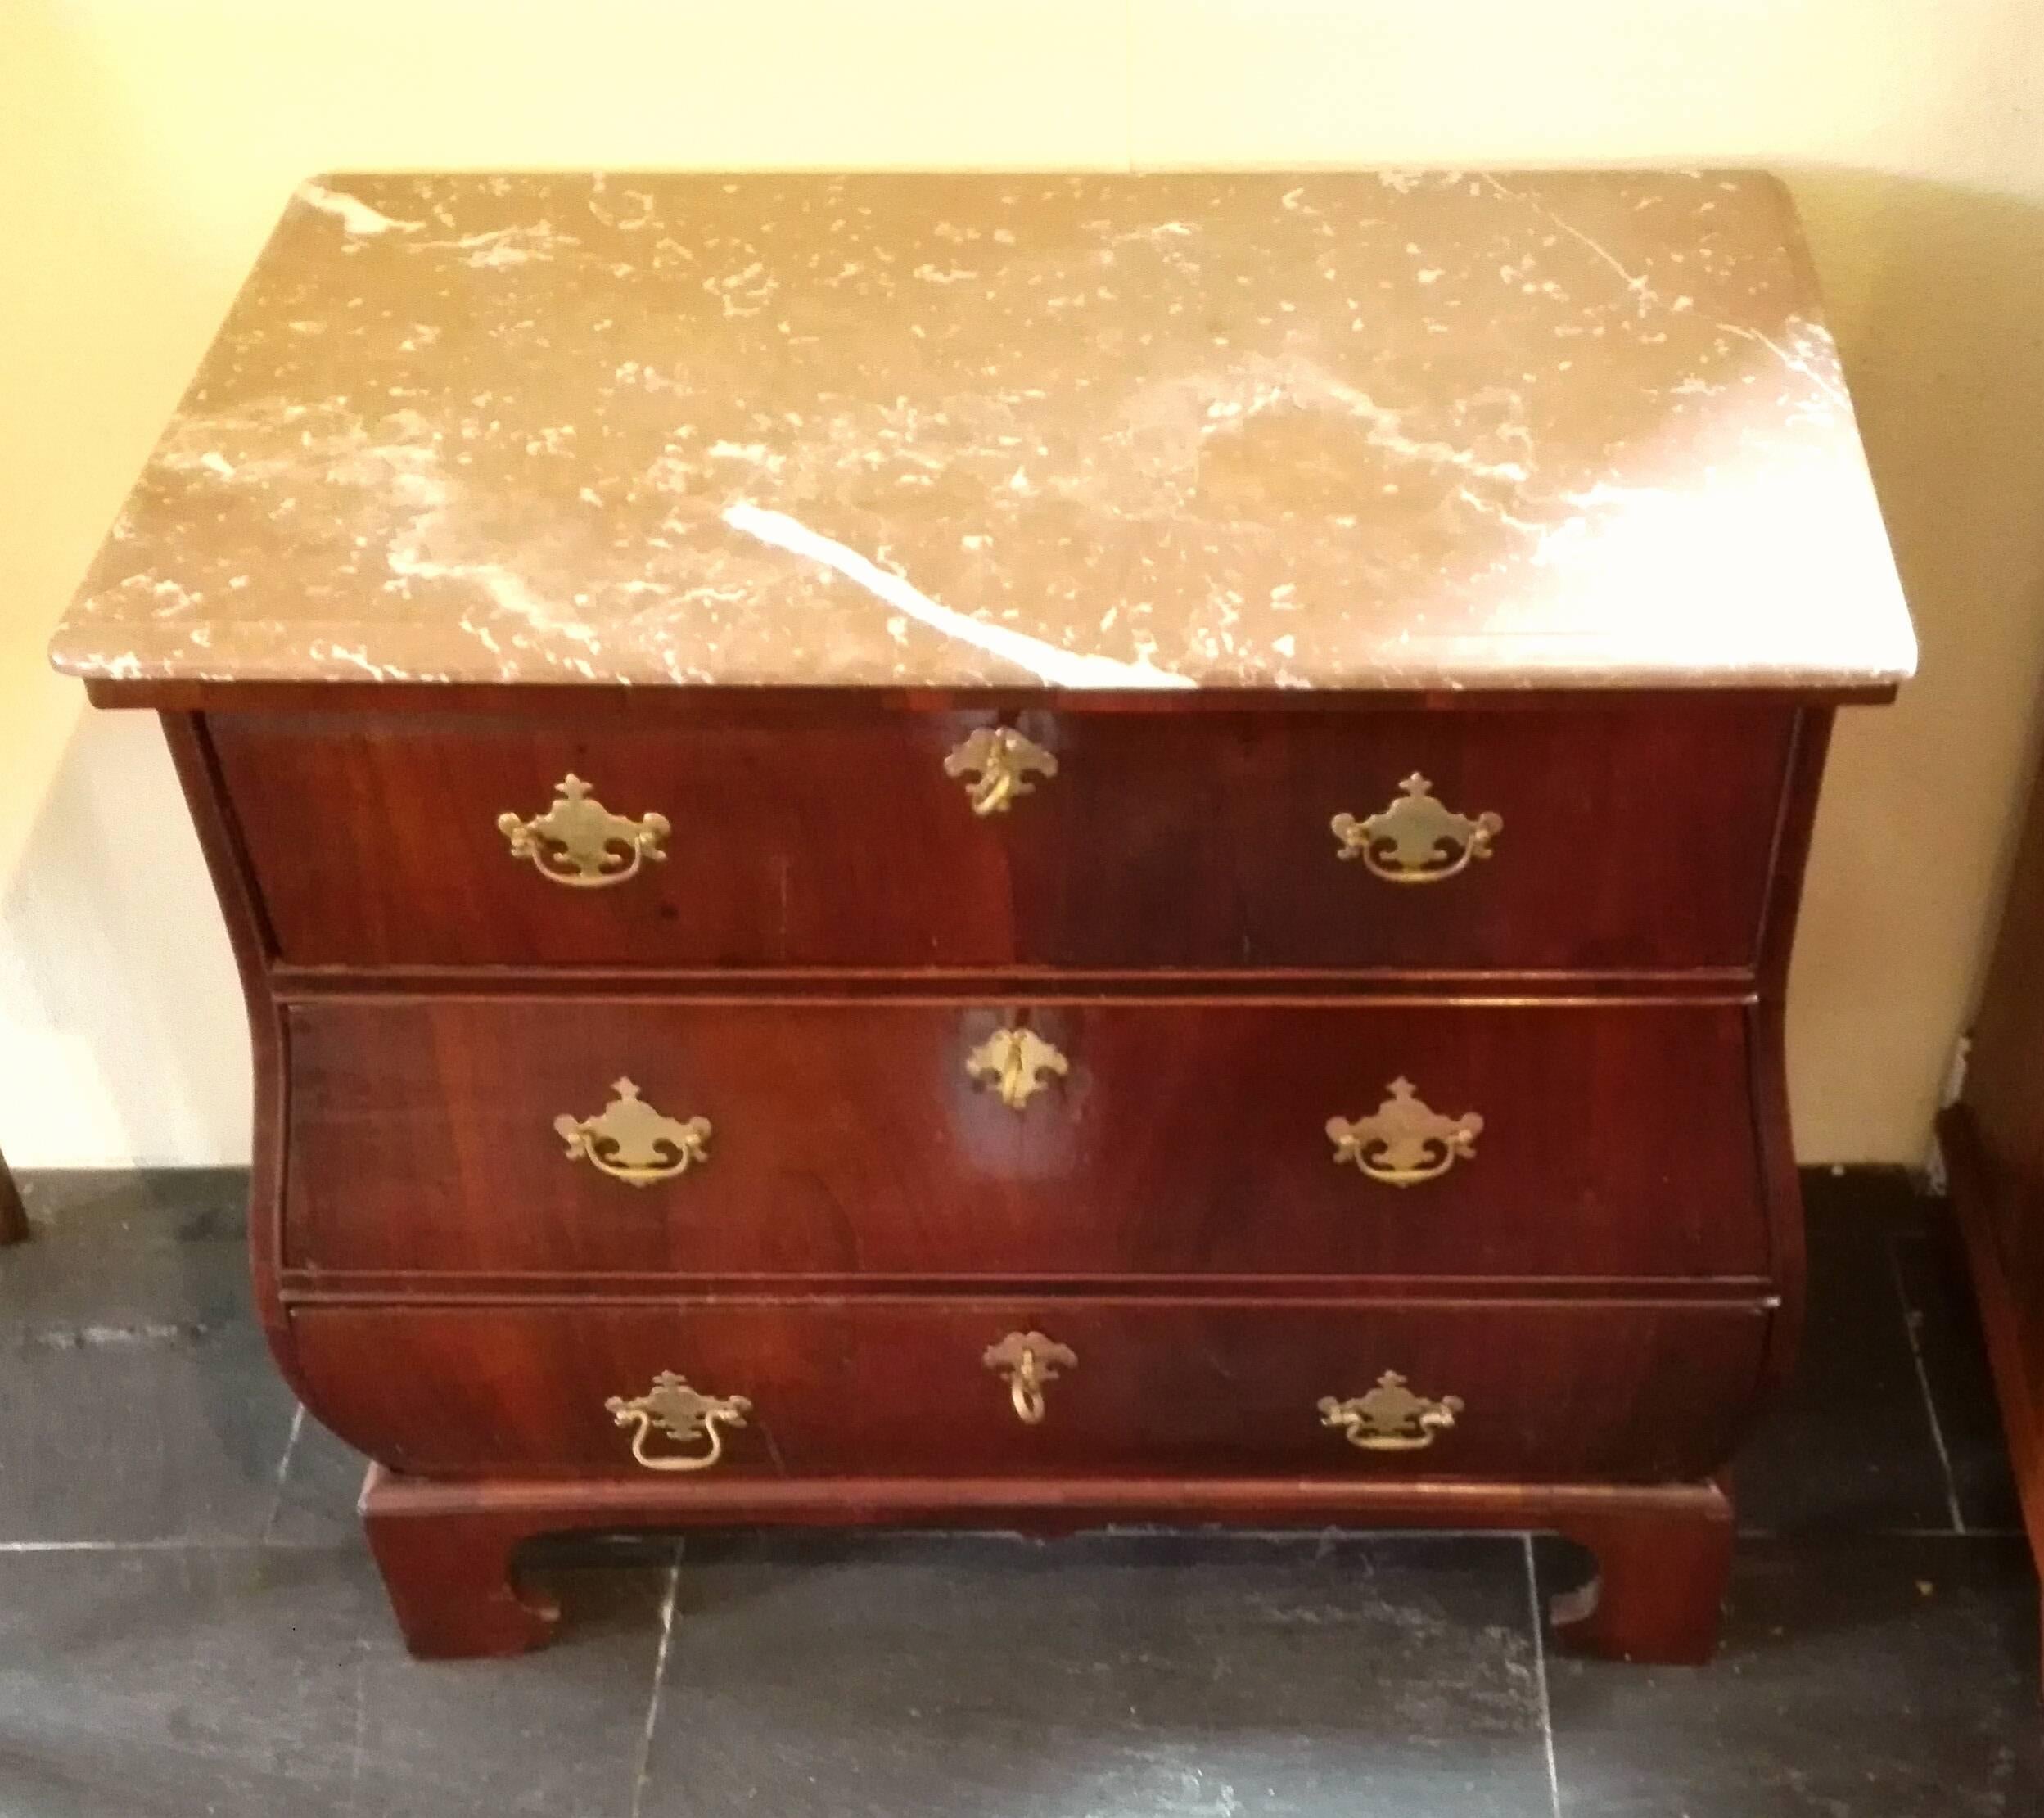 This, very small and absolutely fine, Swedish Baroque chest of drawers, is complete , but absolutely sensitive and expertly restored and shellac hand polished ! The cambered body and the moving drawers form a harmonious symbioses. Fittings and box